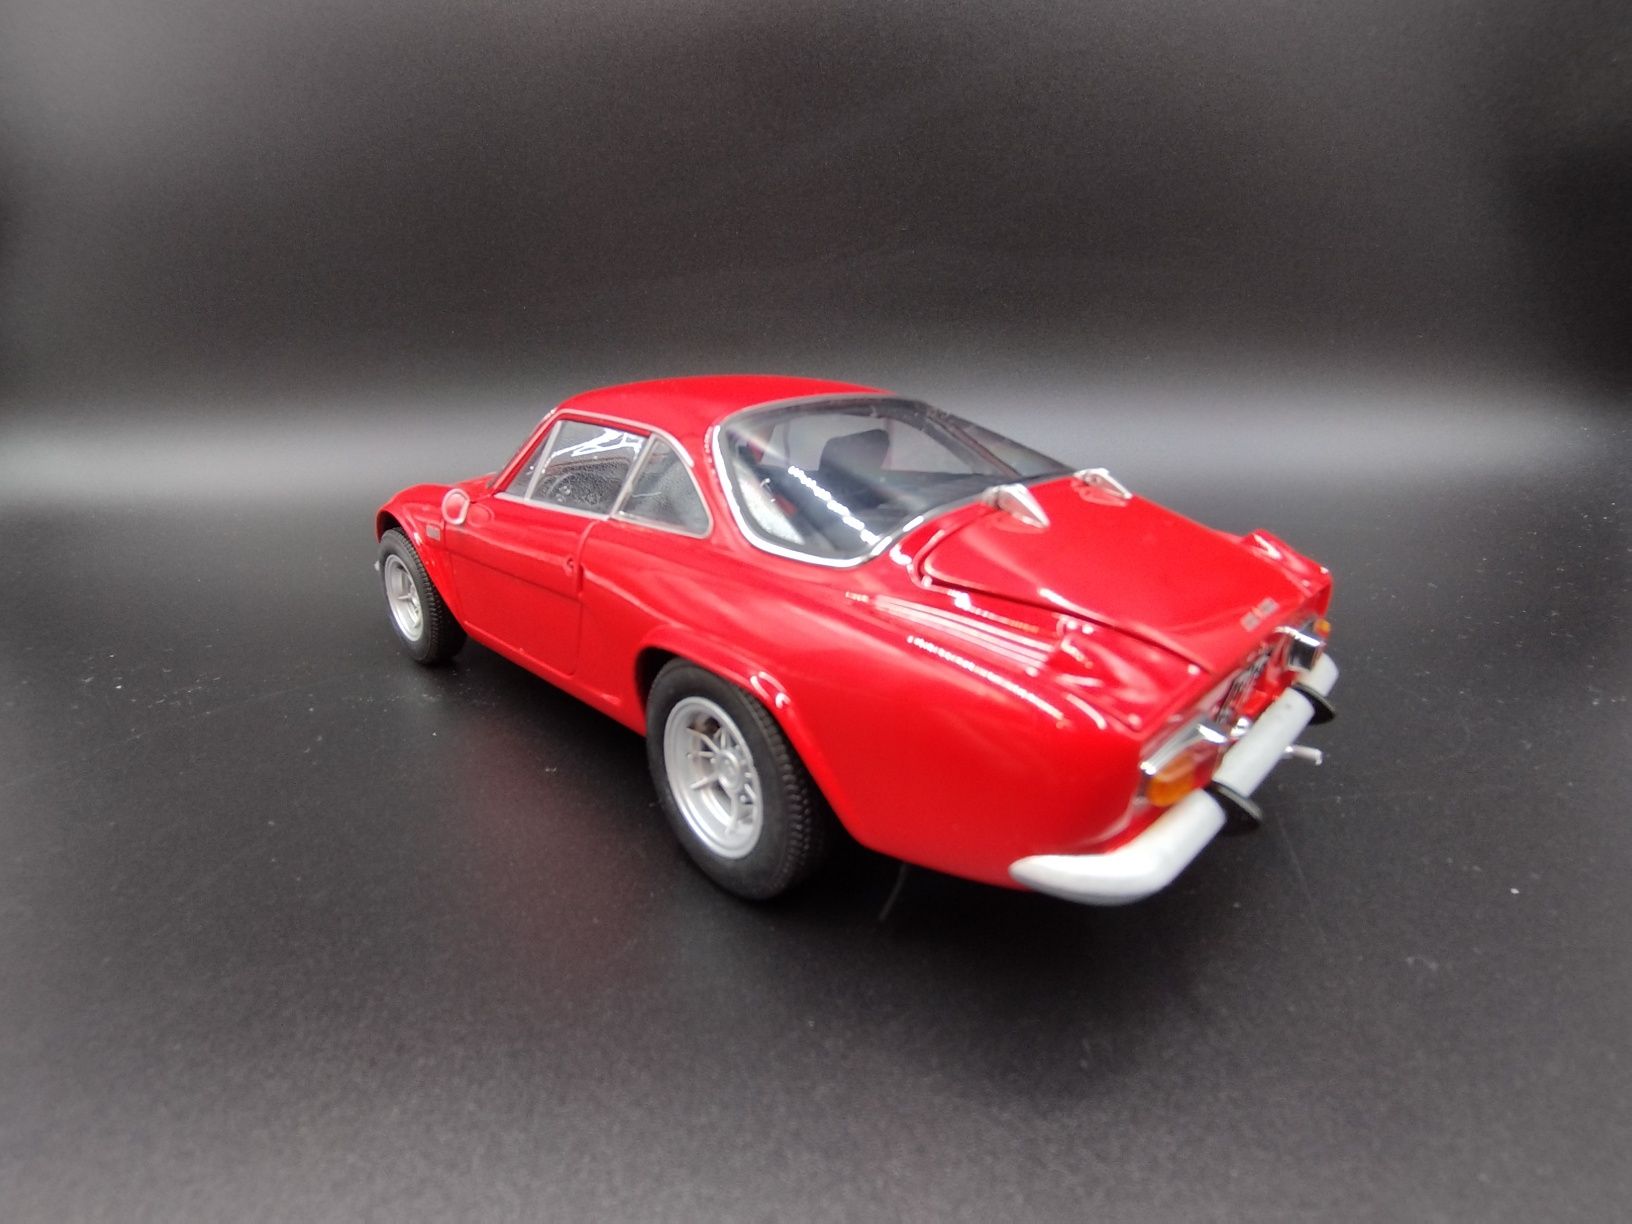 1:18 KYOSHO 1973 Alpine A110 Renault 1600 S Red model nowy